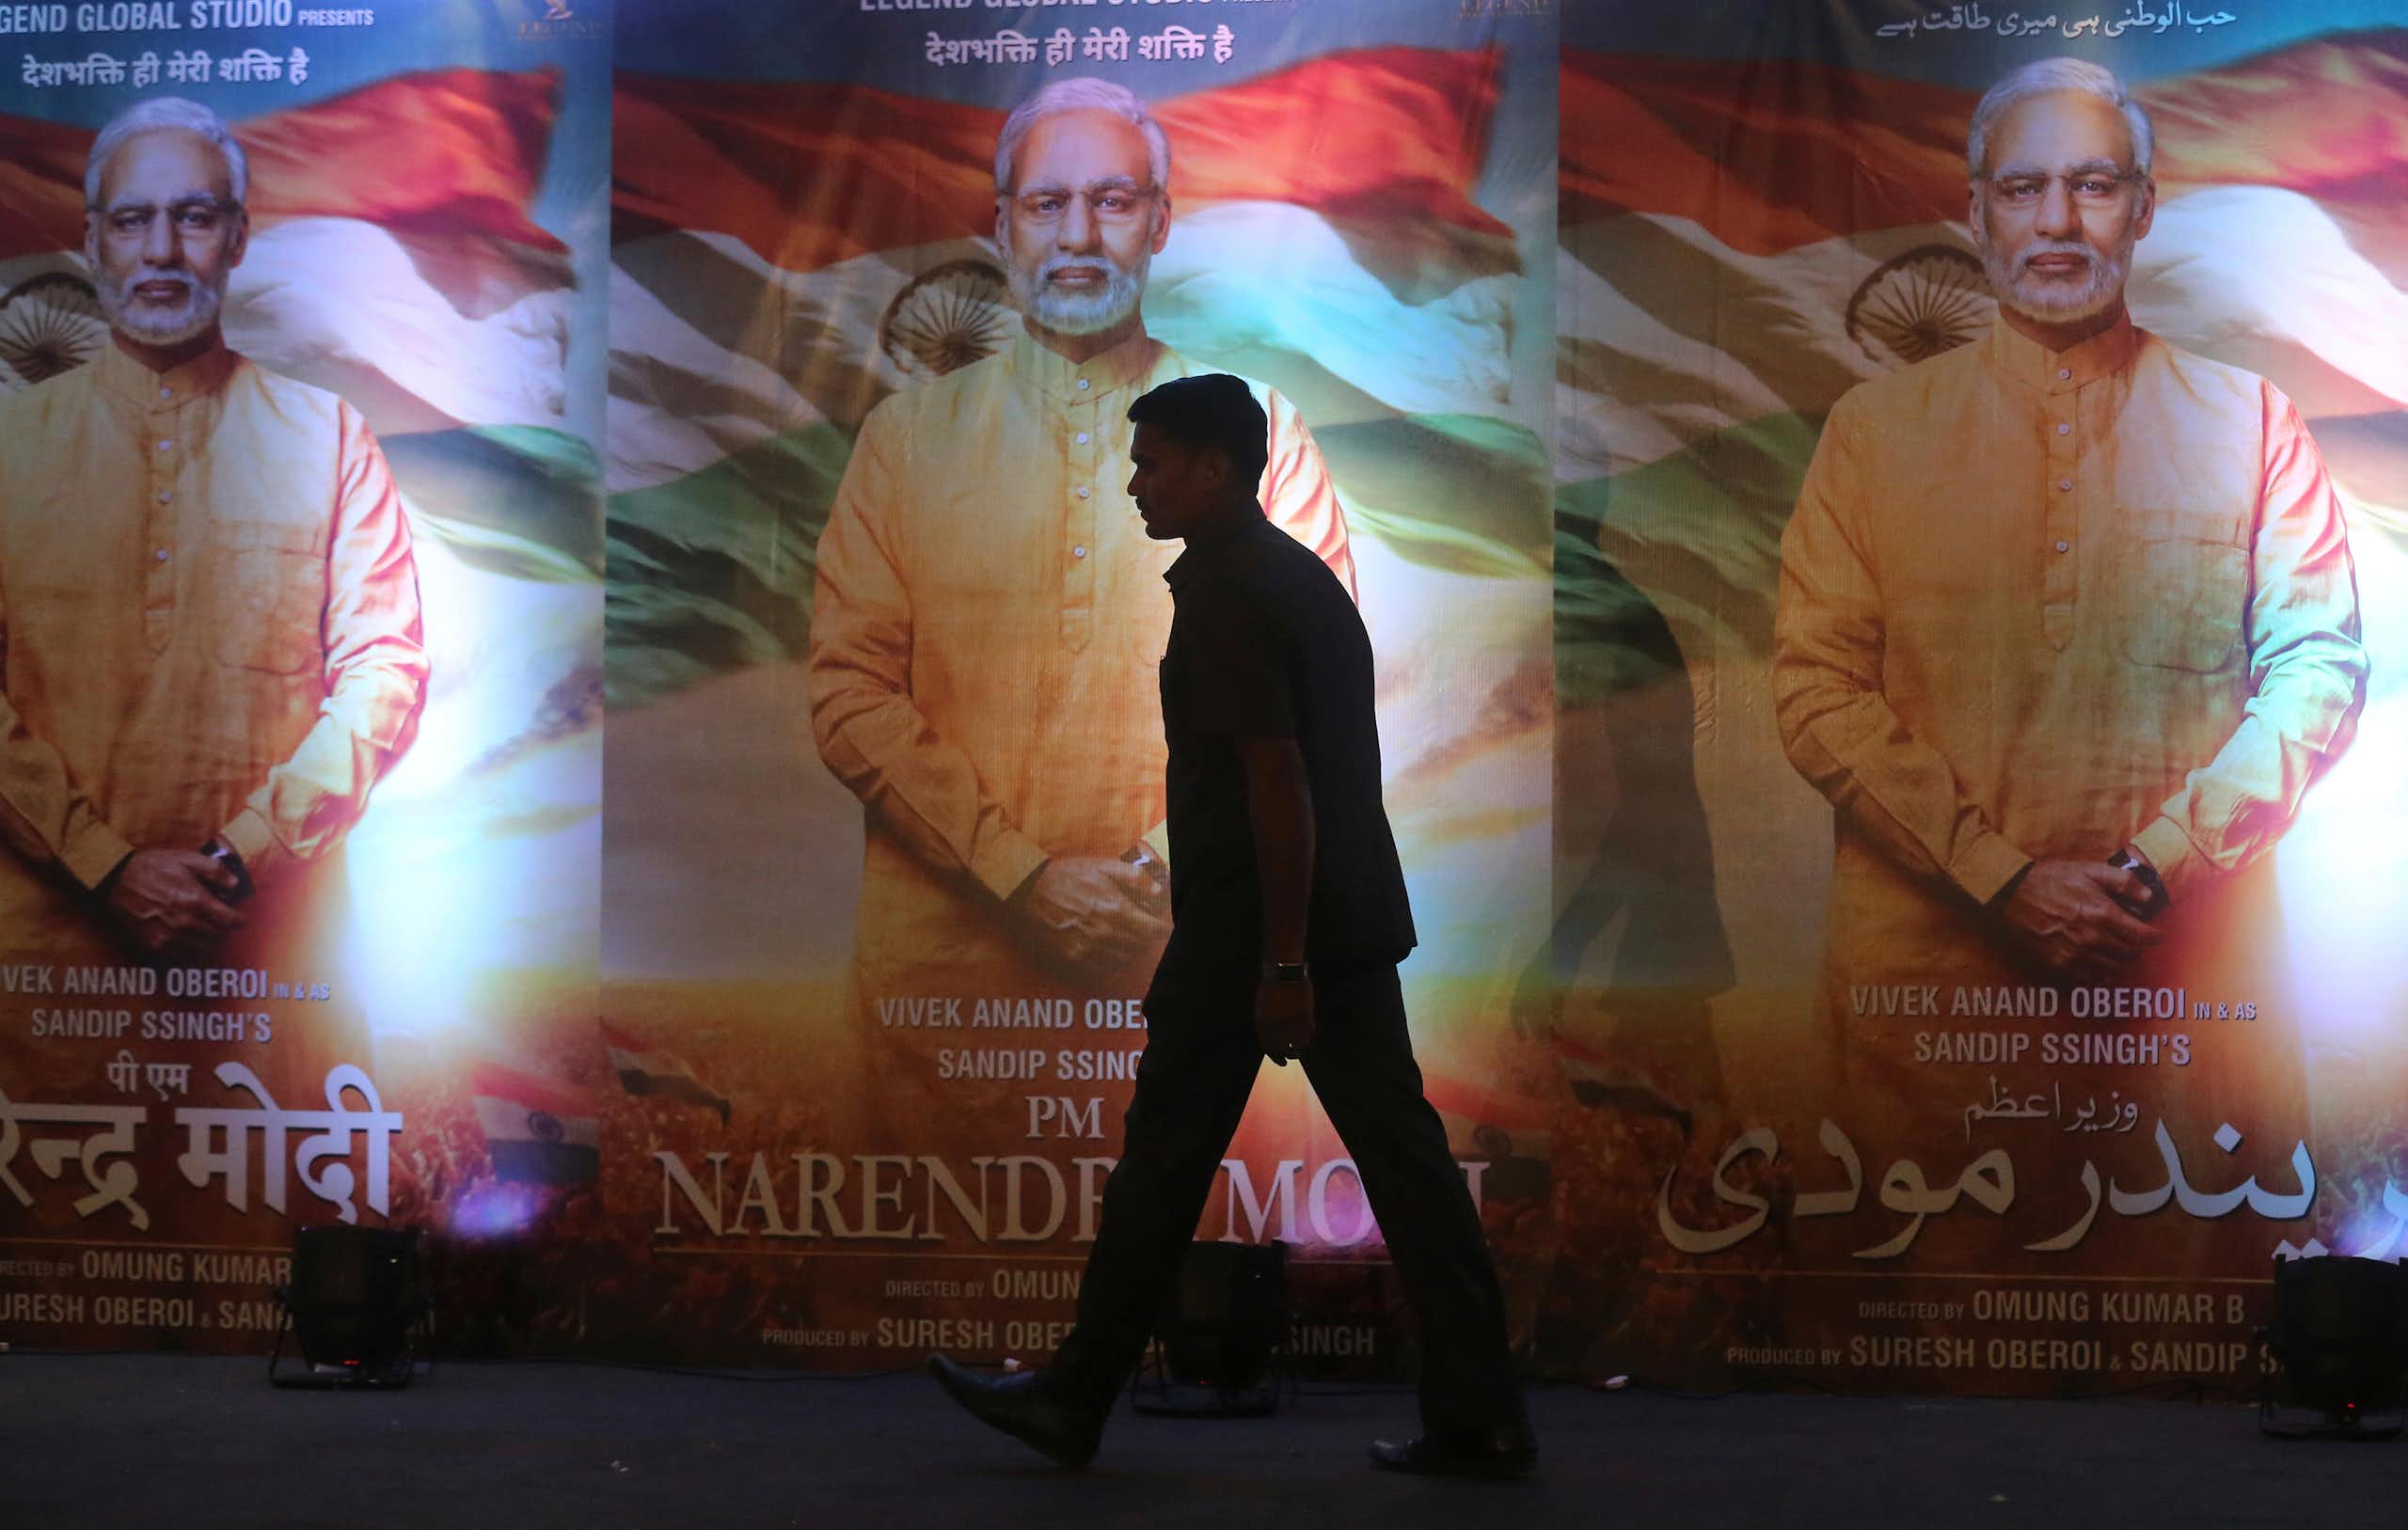 A silhouette of a man walking past three identical posters showing a gray-haired man, dressed in a long saffron-color shirt, with the flag of India in the background.